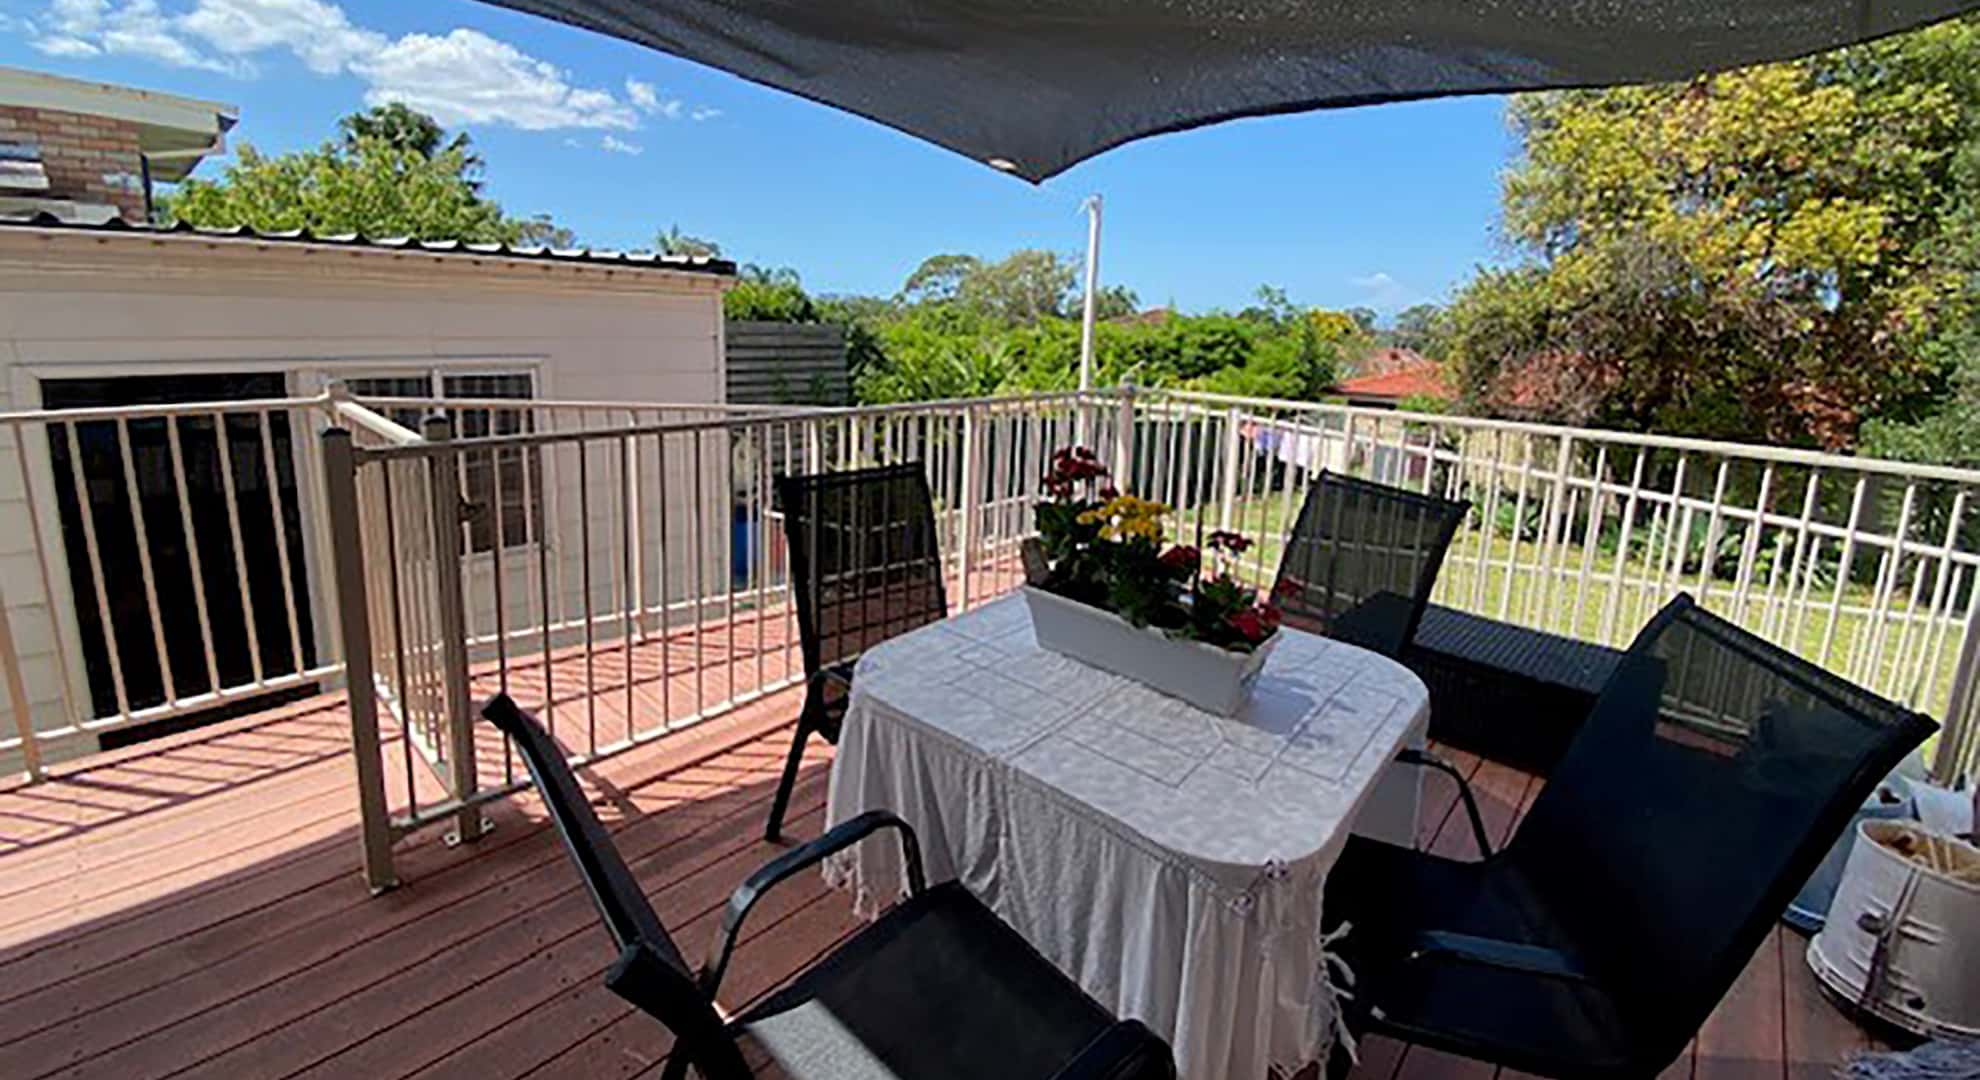 The shaded deck area with a gated ramp that travels down to a grassed back yard.